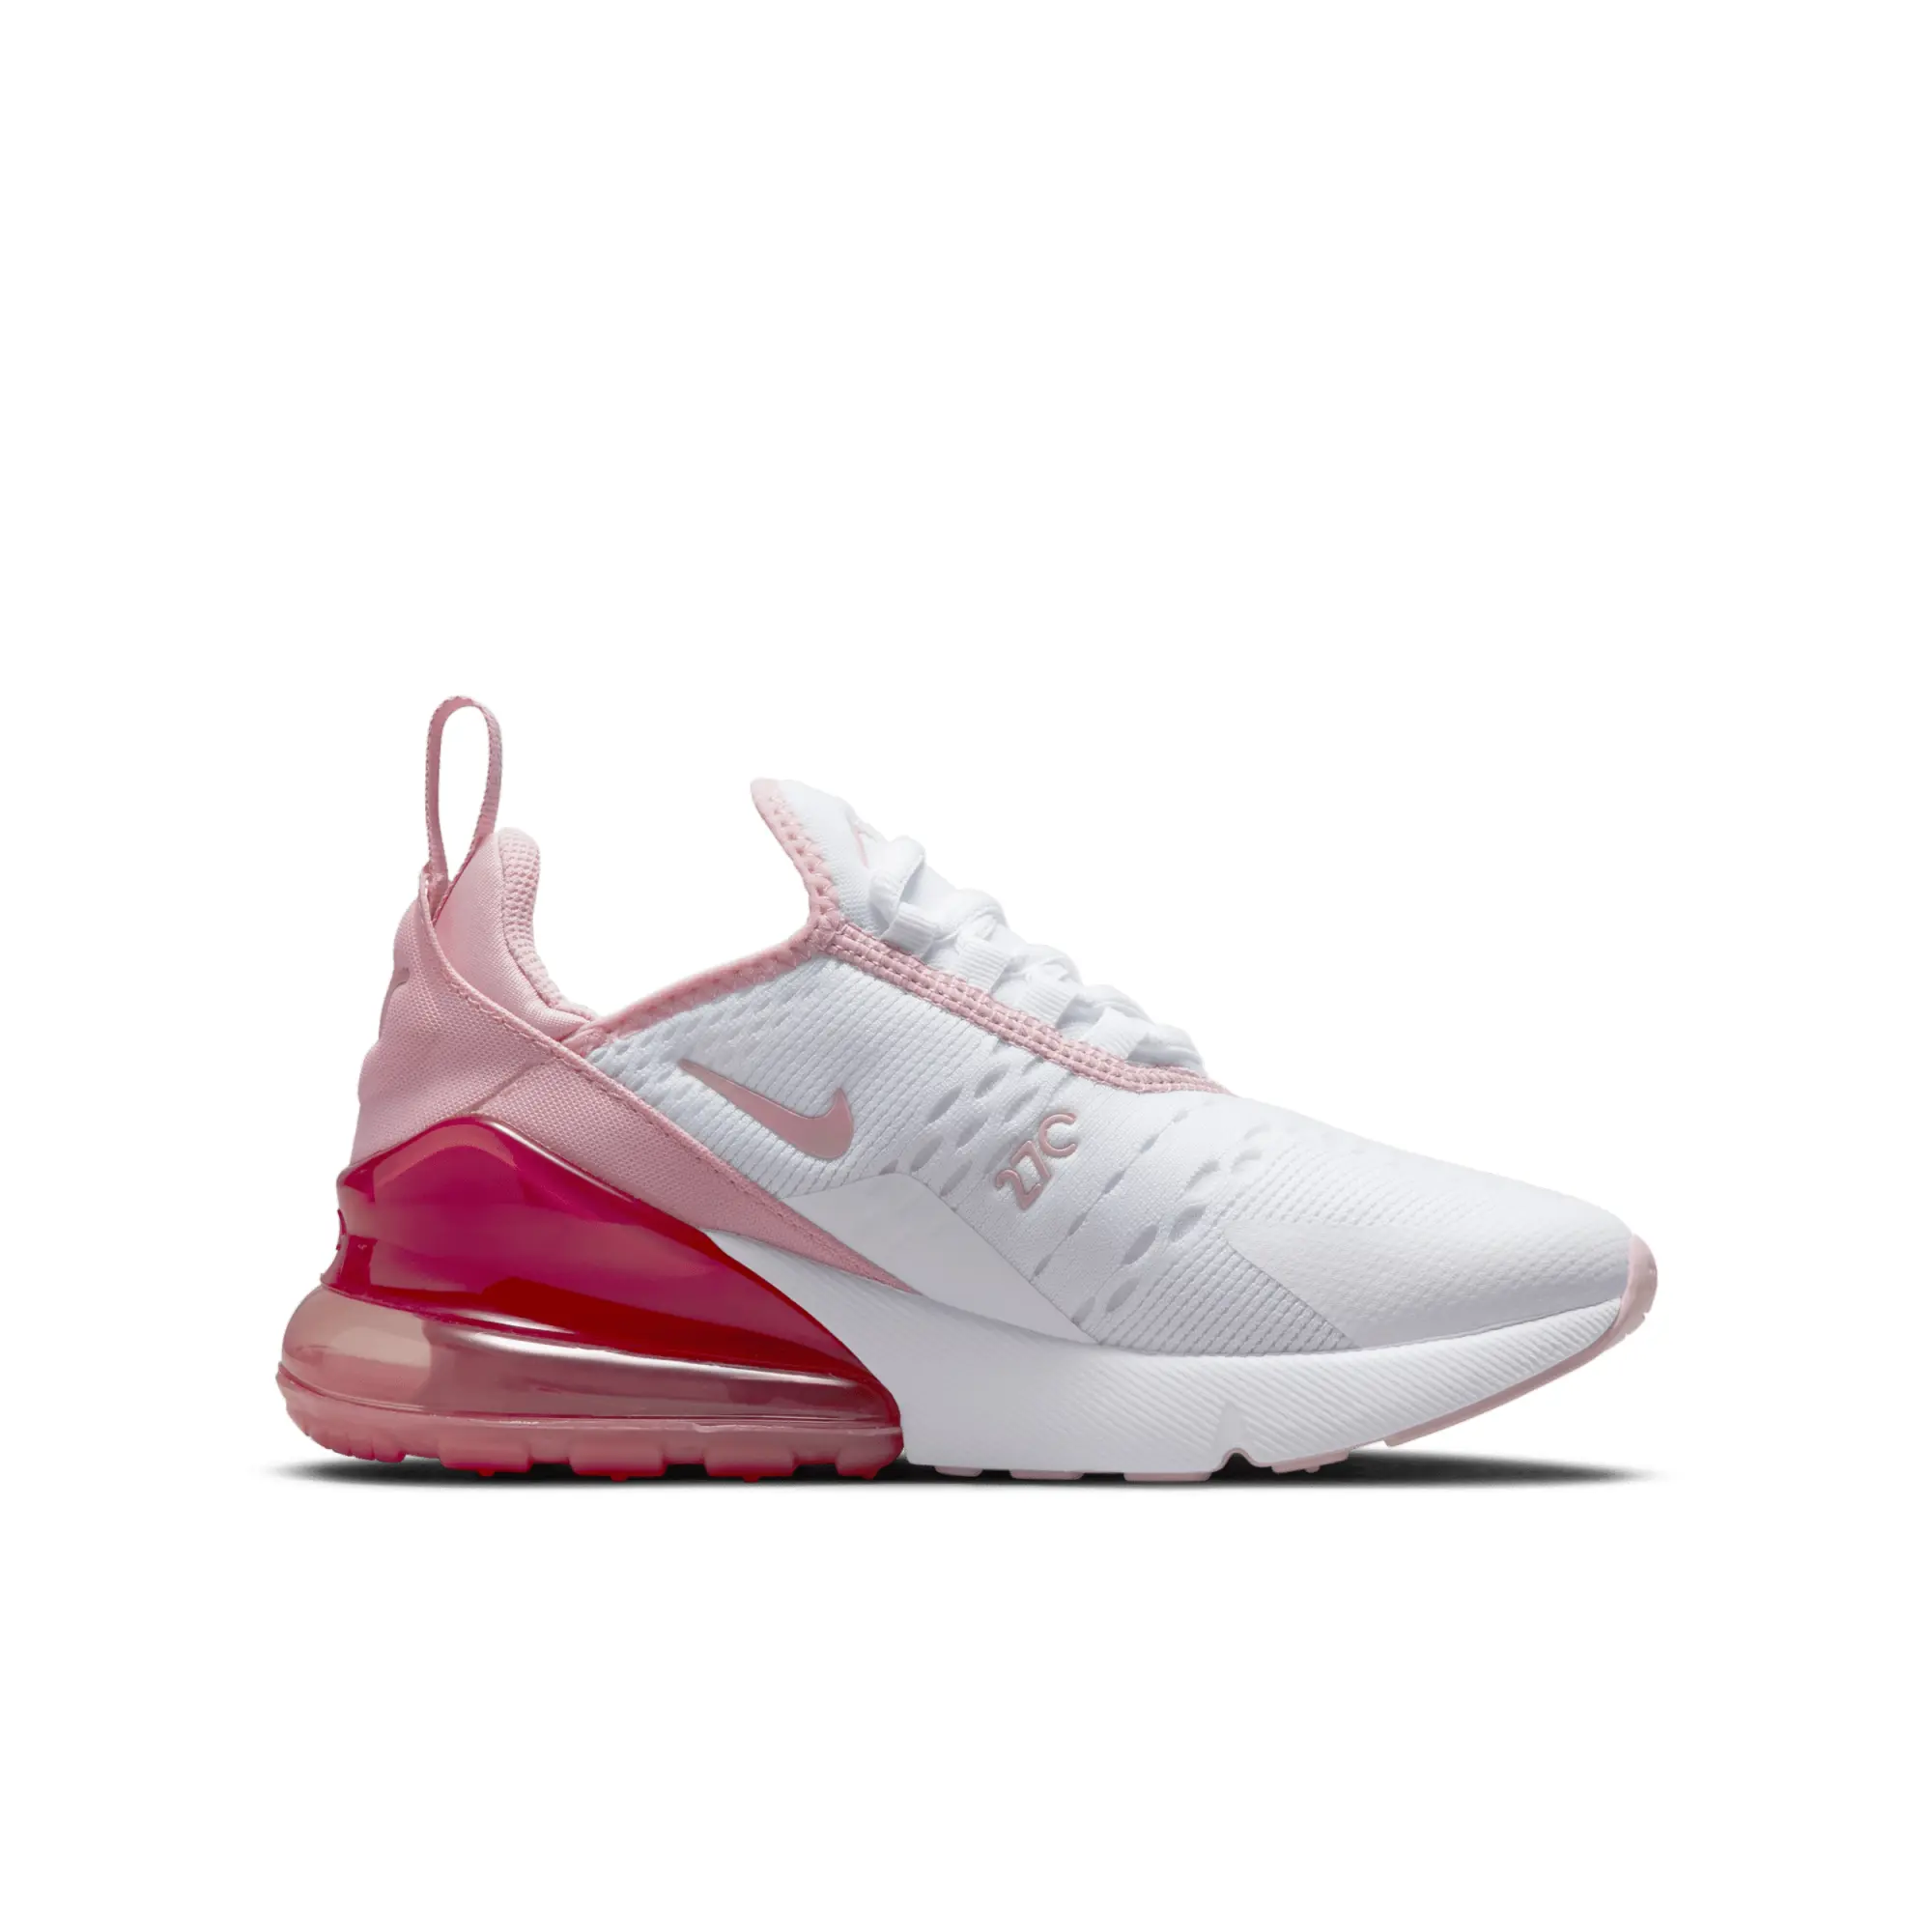 Nike White & Pink Air Max 270 Girls Youth Trainers